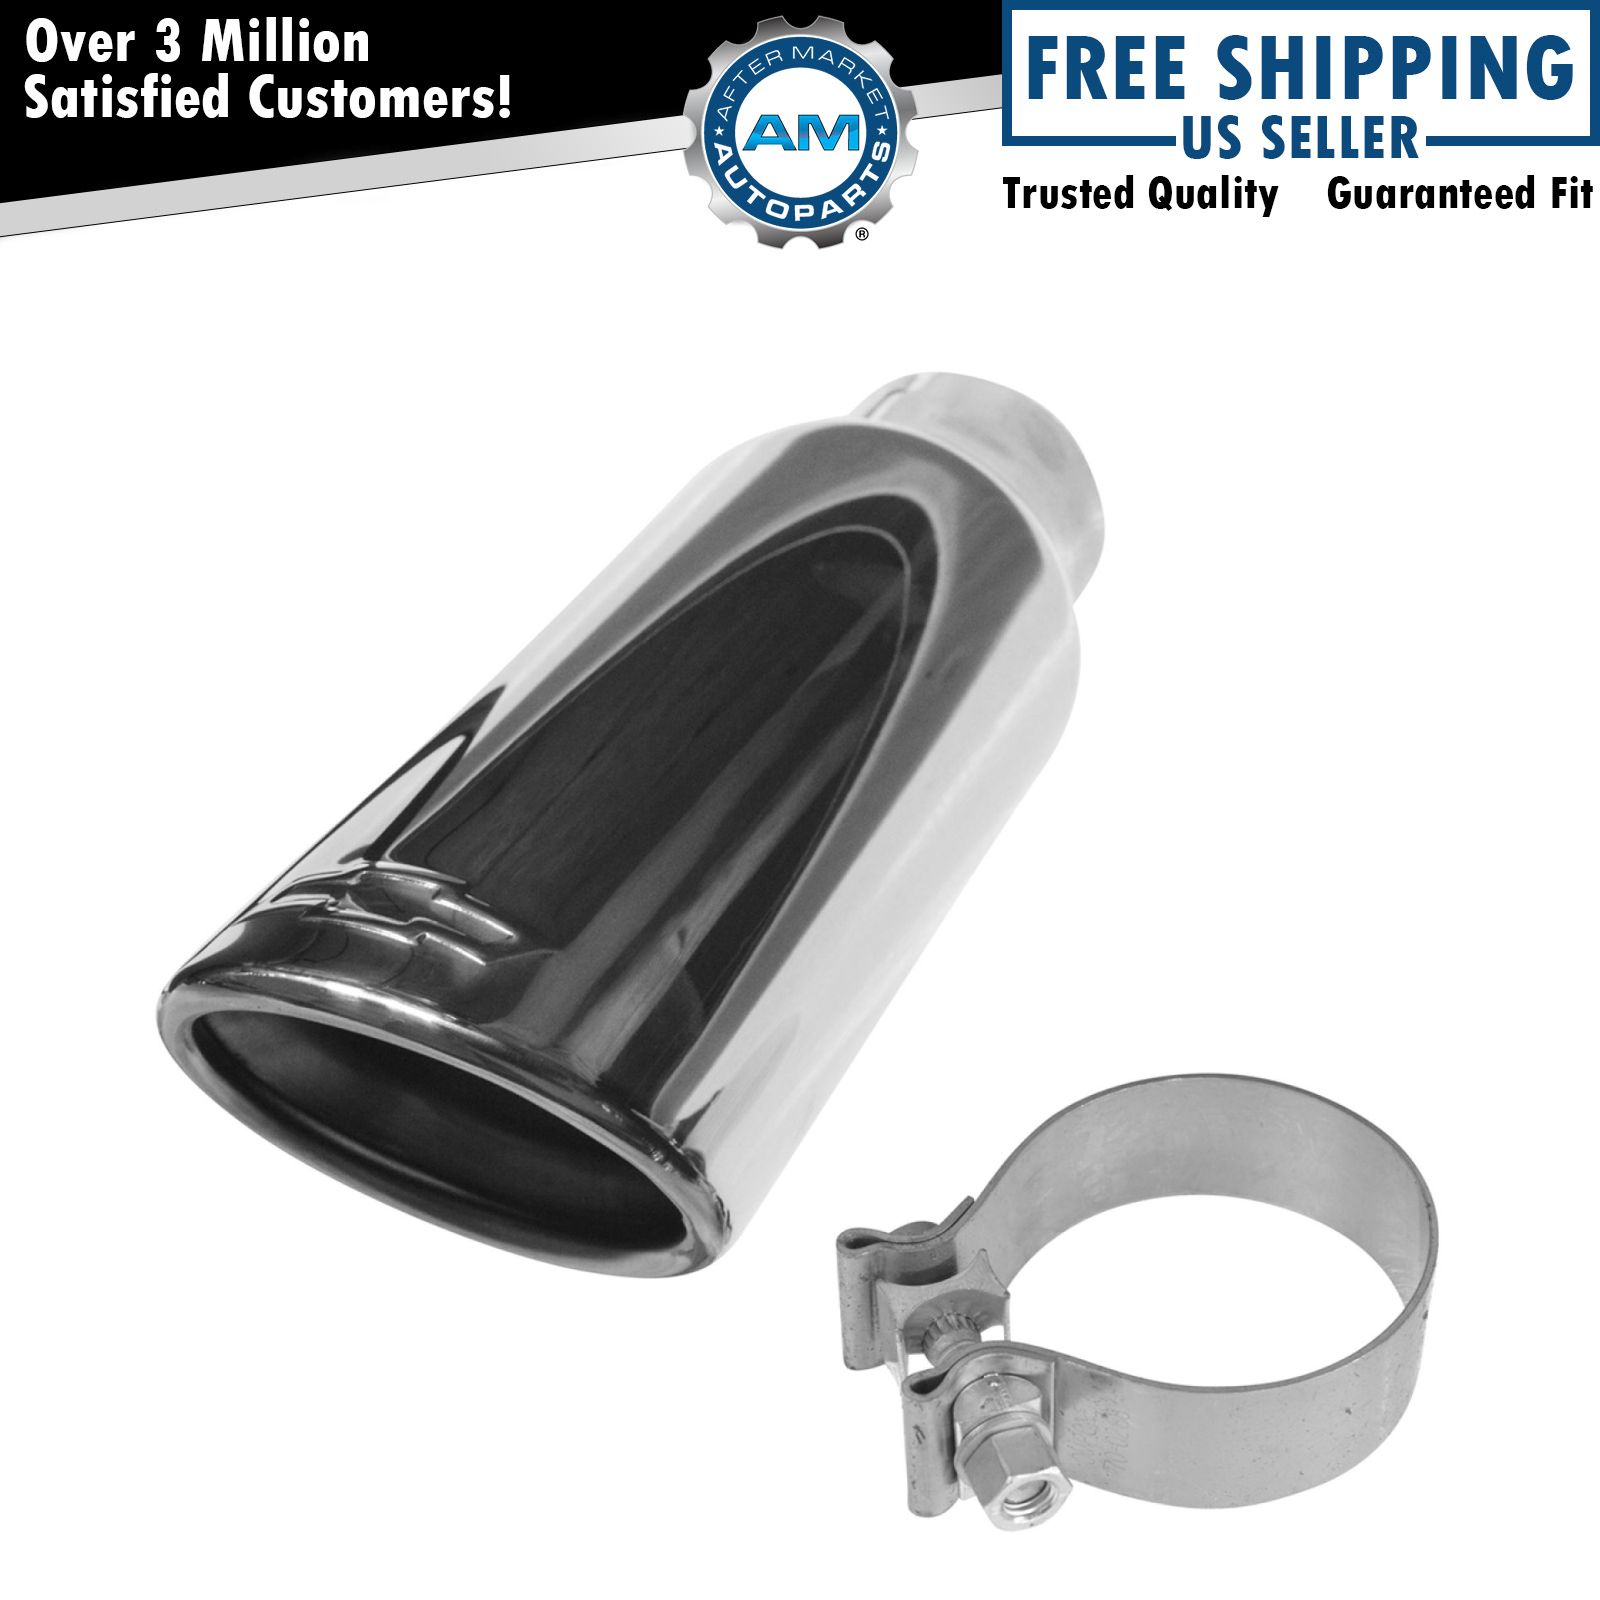 OEM 22799814 Dual Wall Angled Chrome Exhaust Tip for Chevy Silverado